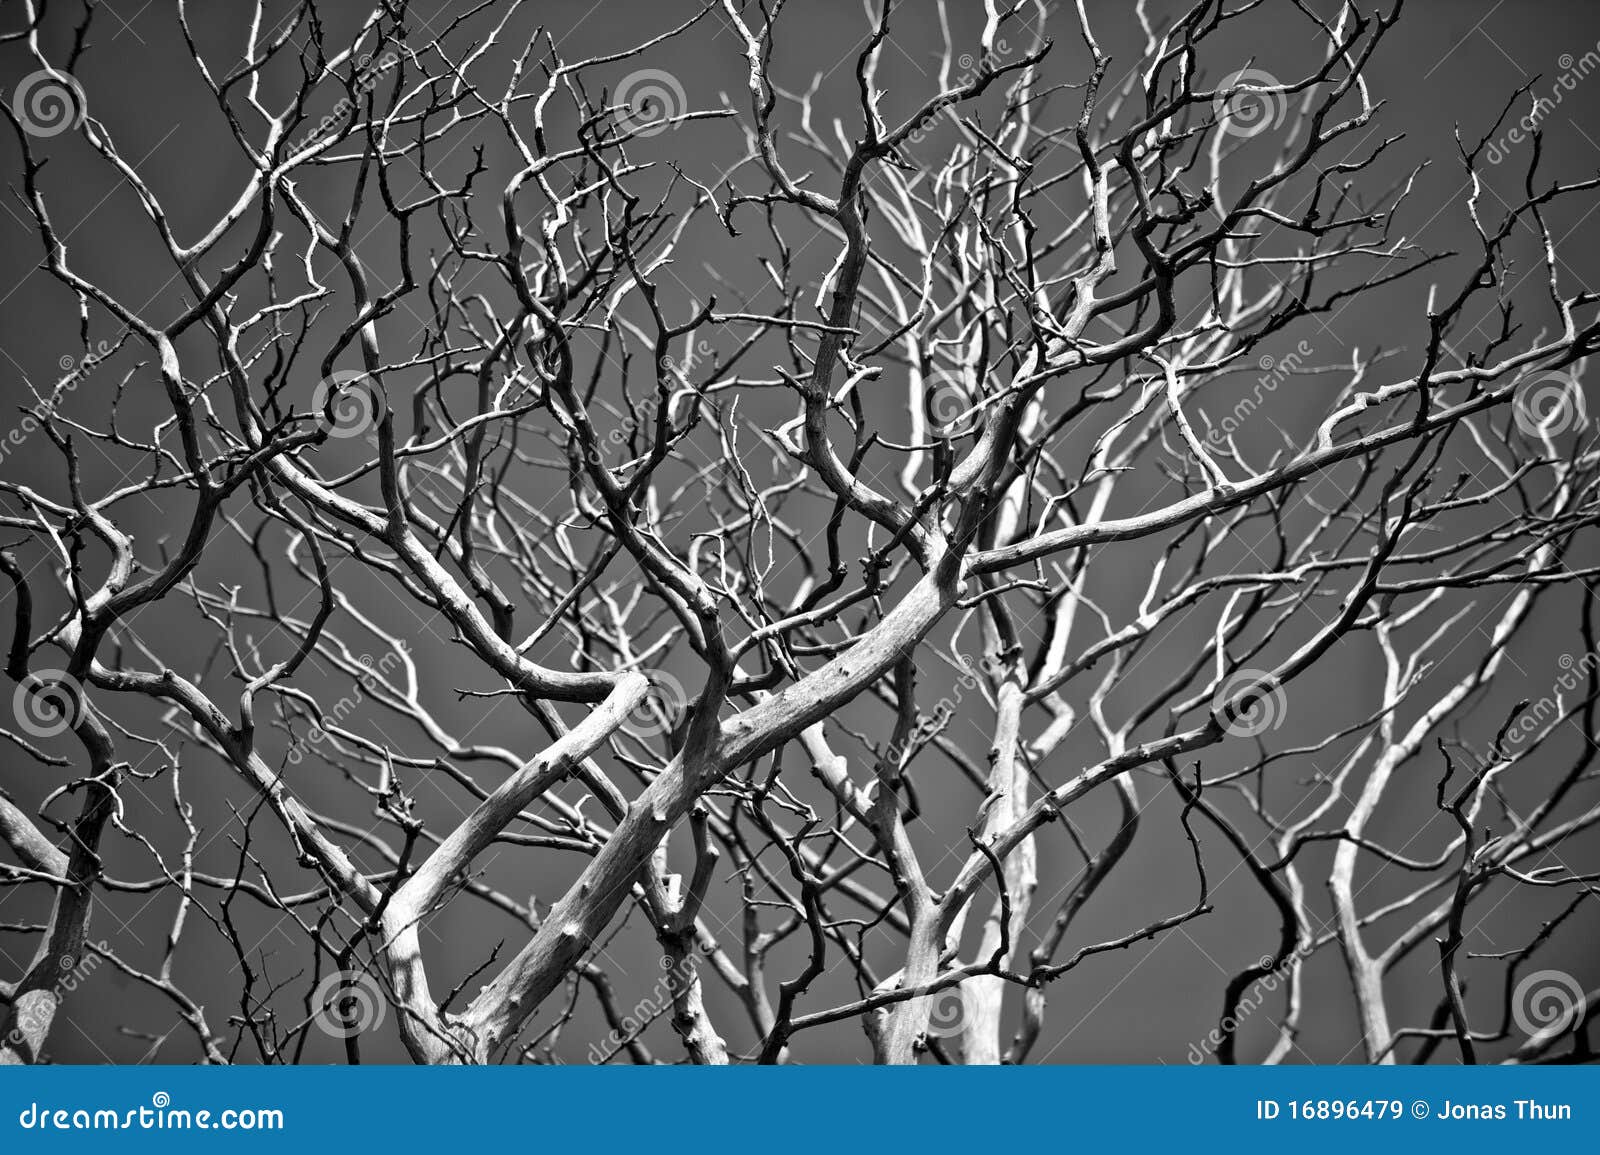 Abstract Branches Royalty Free Stock Images - Image: 16896479